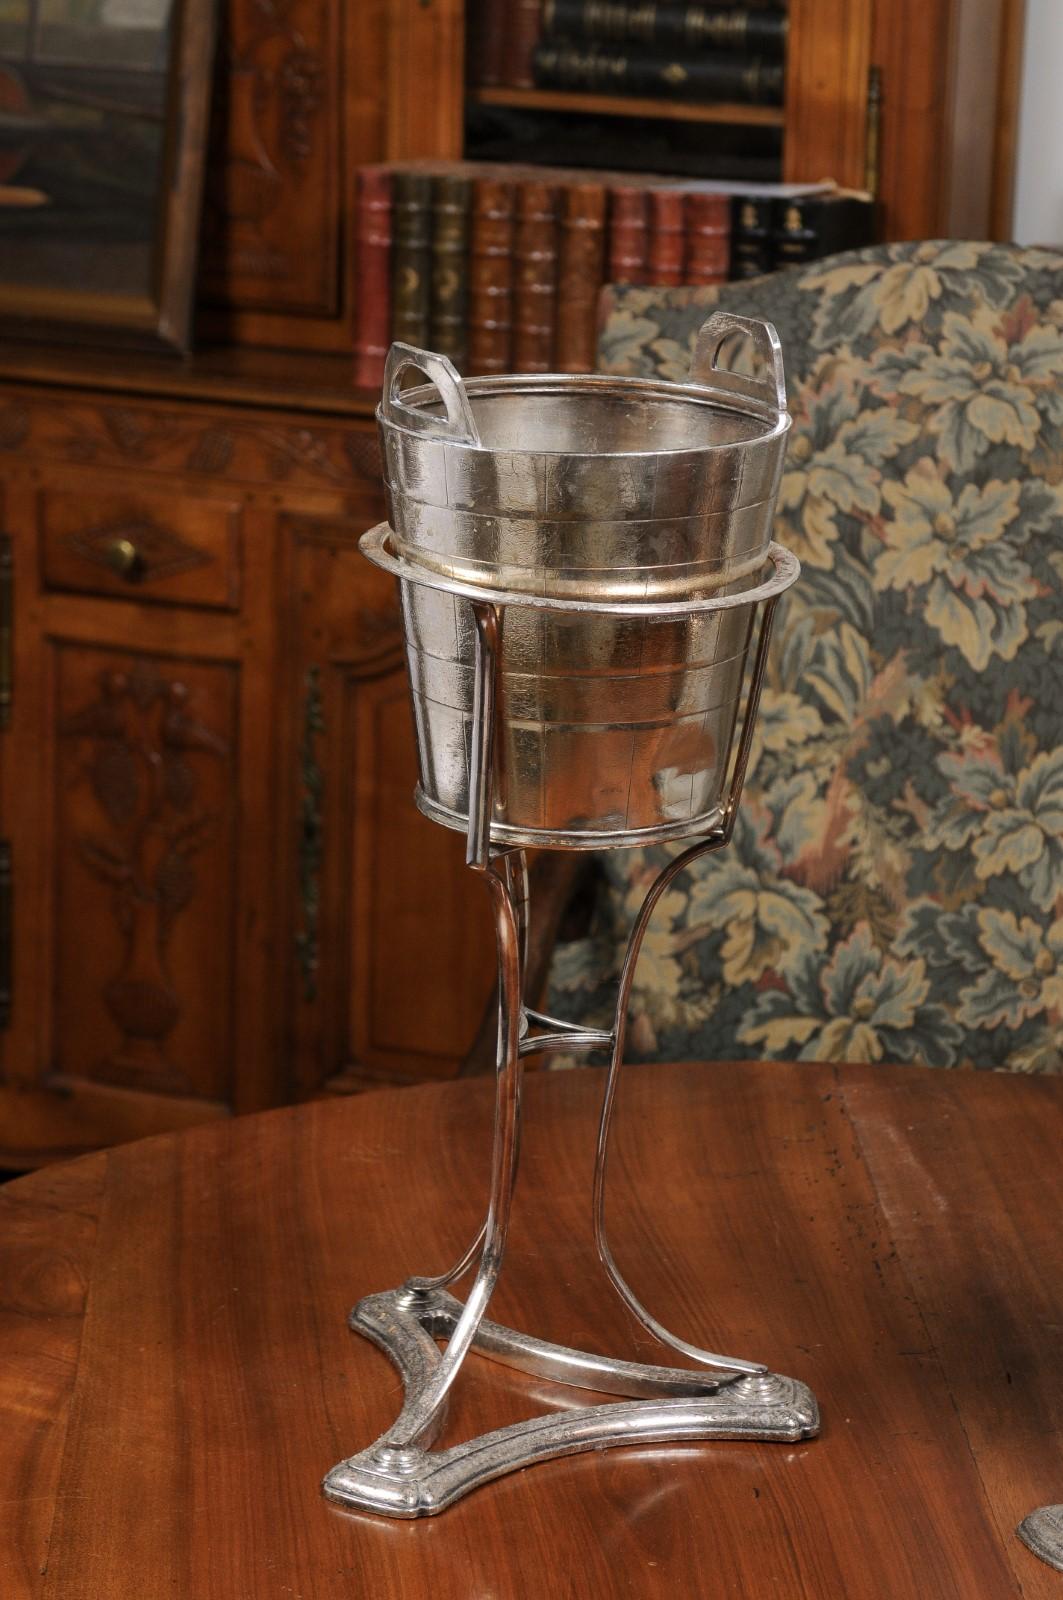 20th Century English Silver Plated Champagne Buckets Made for the Canadian Pacific Railway